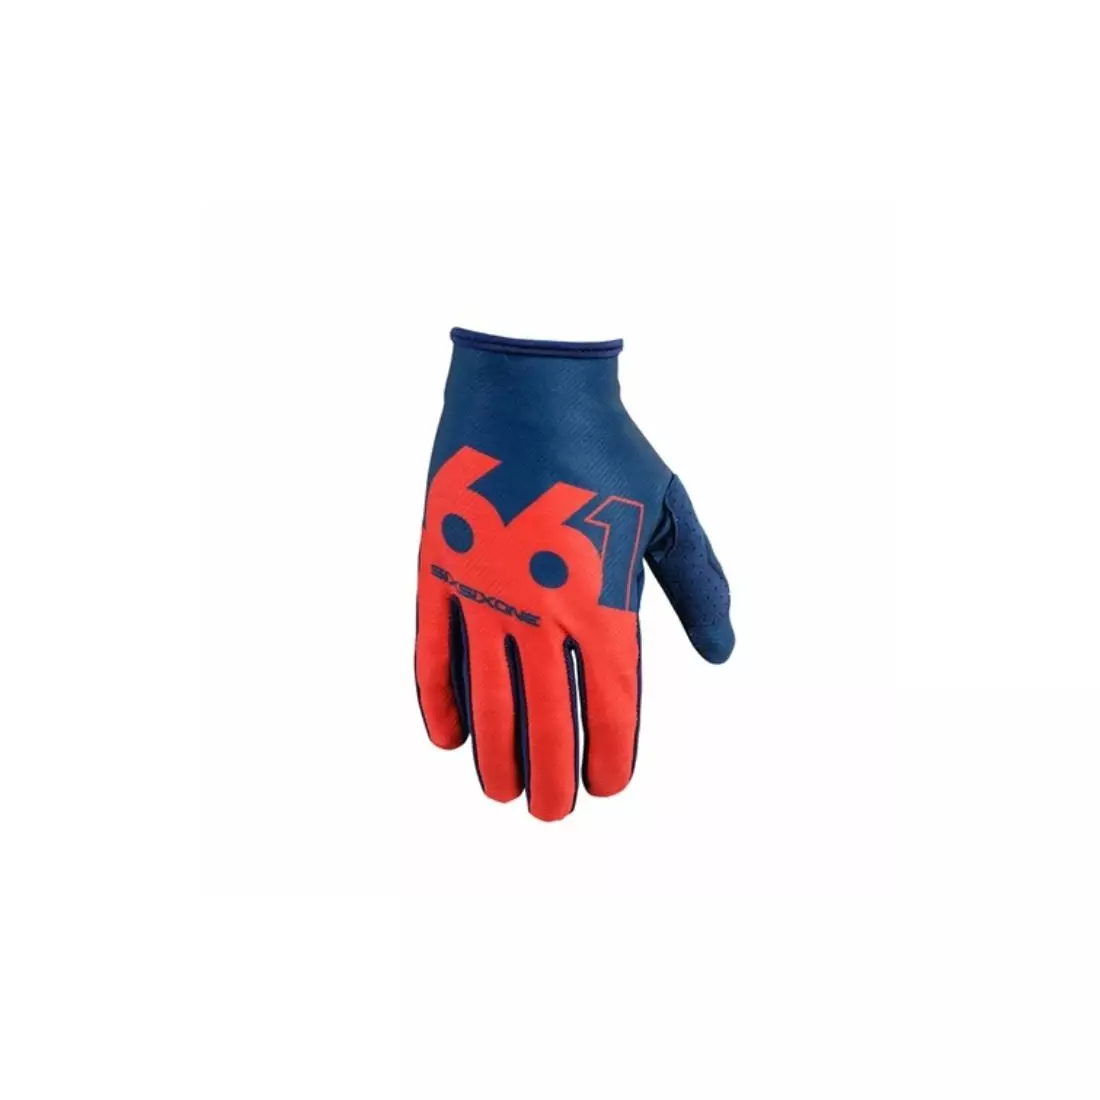 661 cycling gloves COMP navy/red long finger